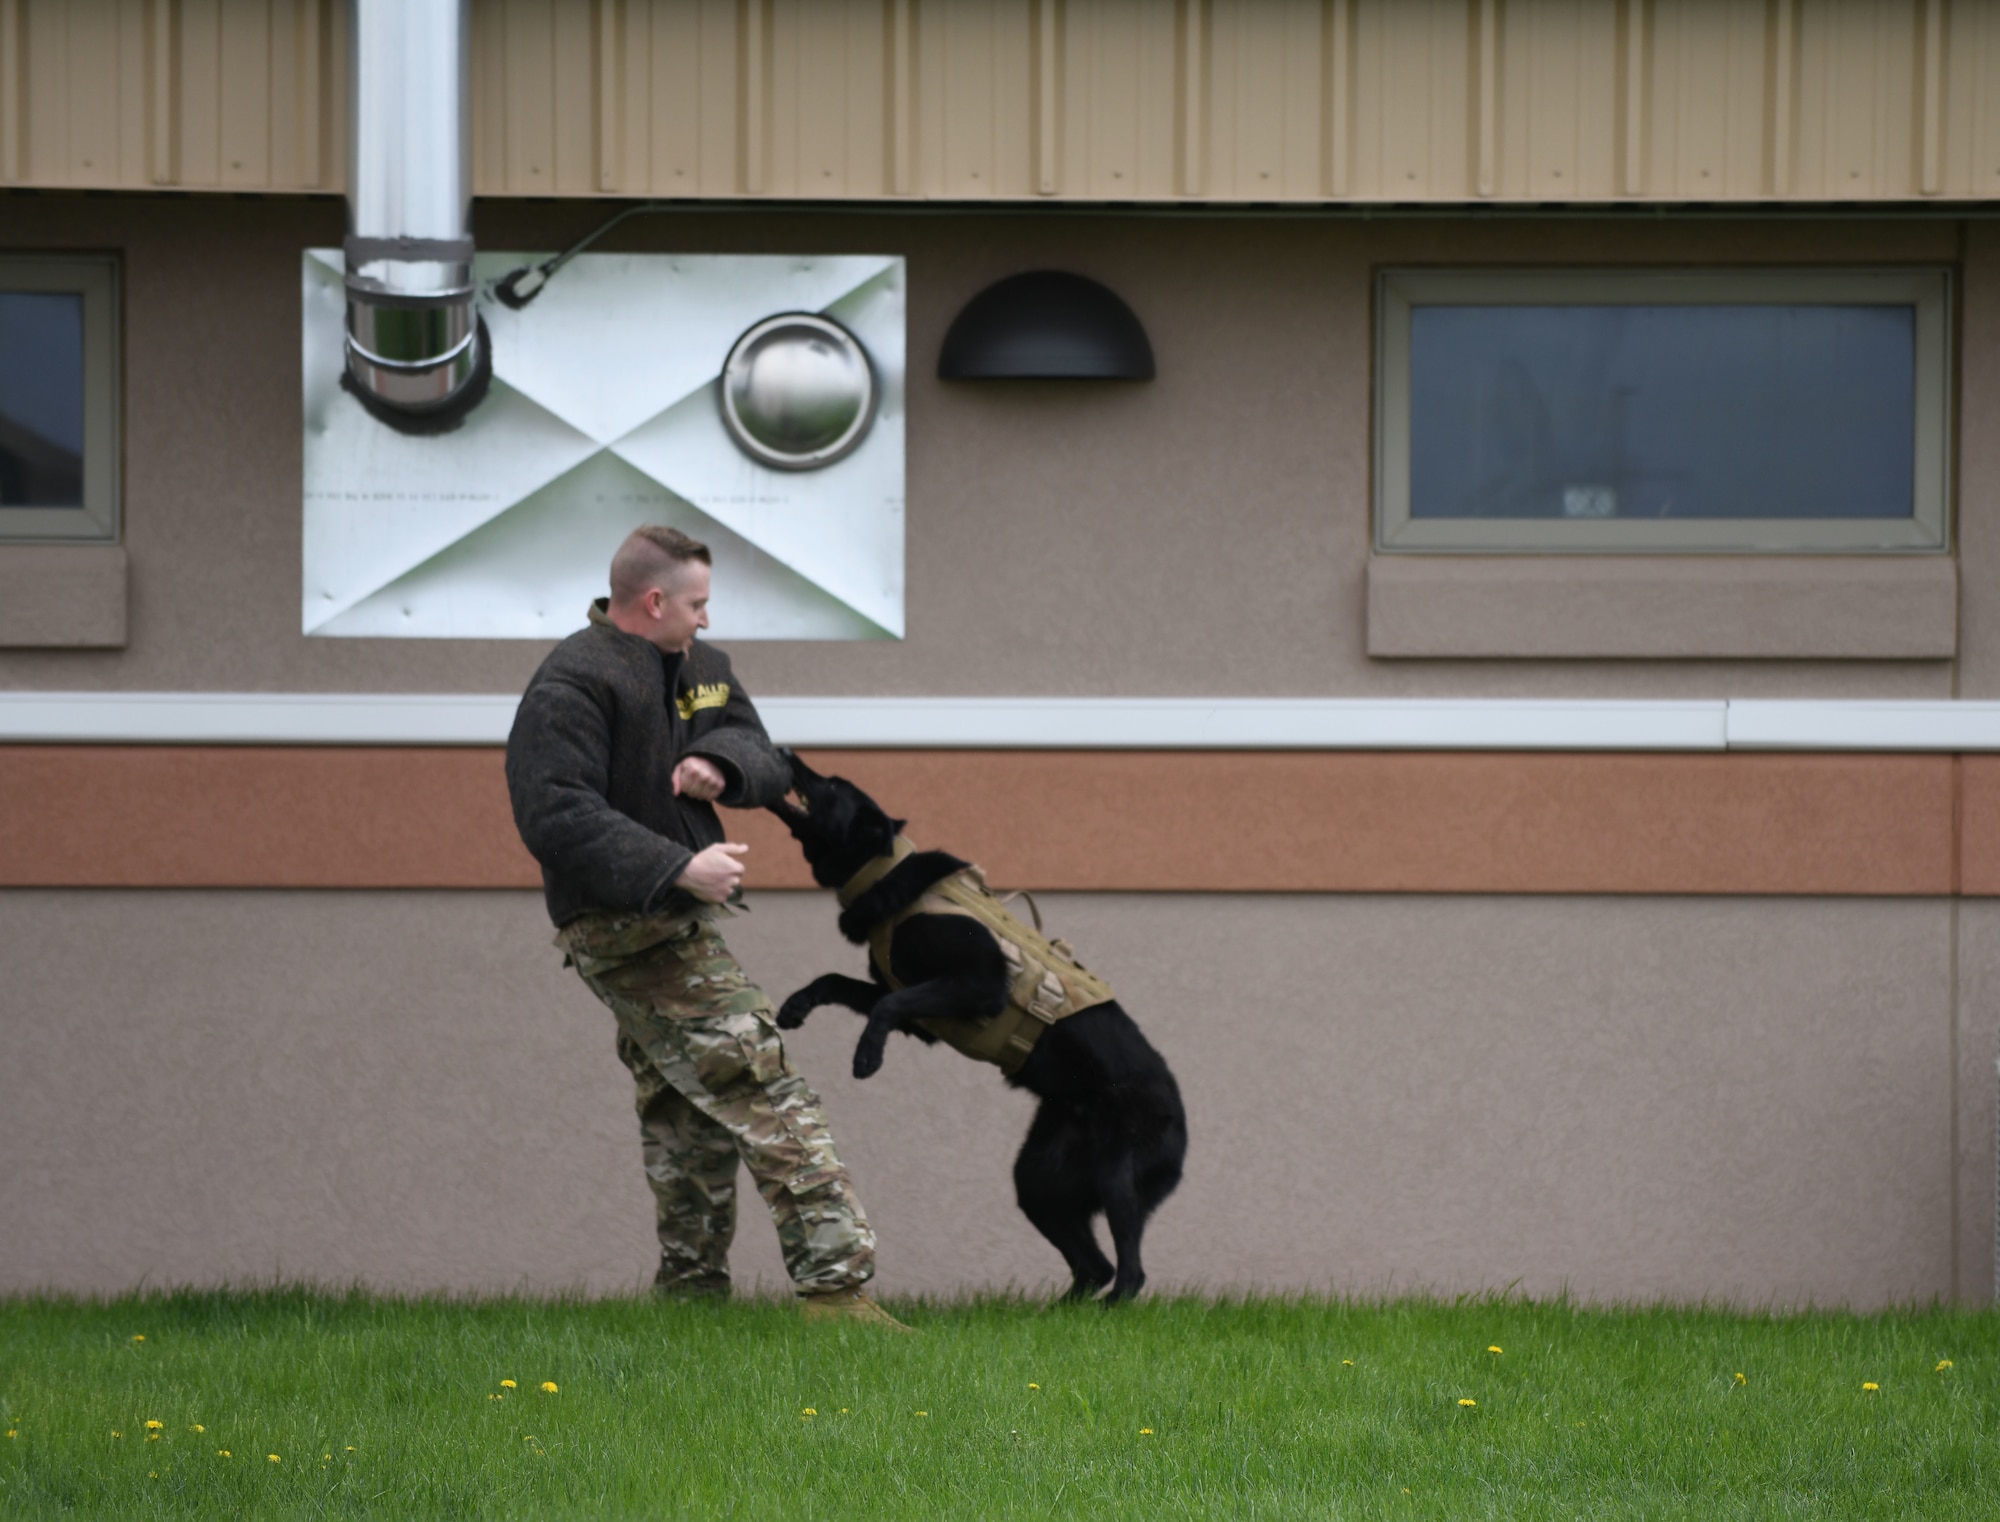 Borisz I, a 28th Security Forces Squadron military working dog, gnaws at Staff Sgt. Paul Gingras, a 28th SFS military working dog kennel master, during a demonstration at the 28th SFS K-9 facility on Ellsworth Air Force Base, S.D., May 16, 2019. The MWDs and their handlers are trained to provide narcotics and explosives detection keeping the base safe from threats. (U.S. Air Force photo by Airman 1st Class Christina Bennett)